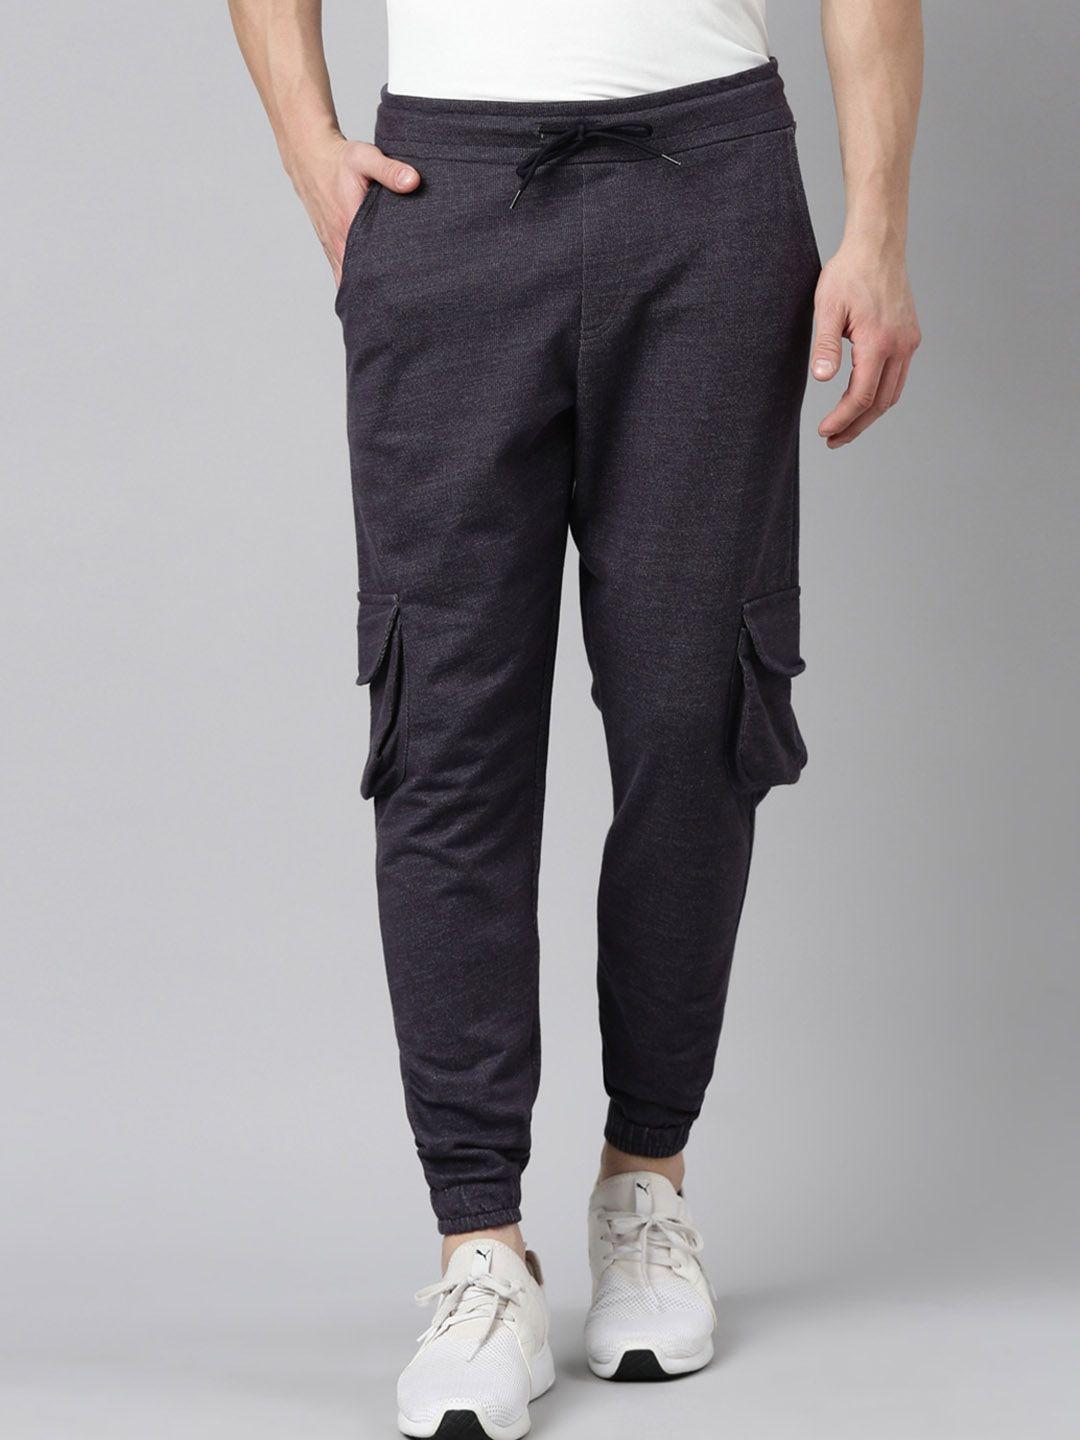 madsto menmid-rise cotton joggers